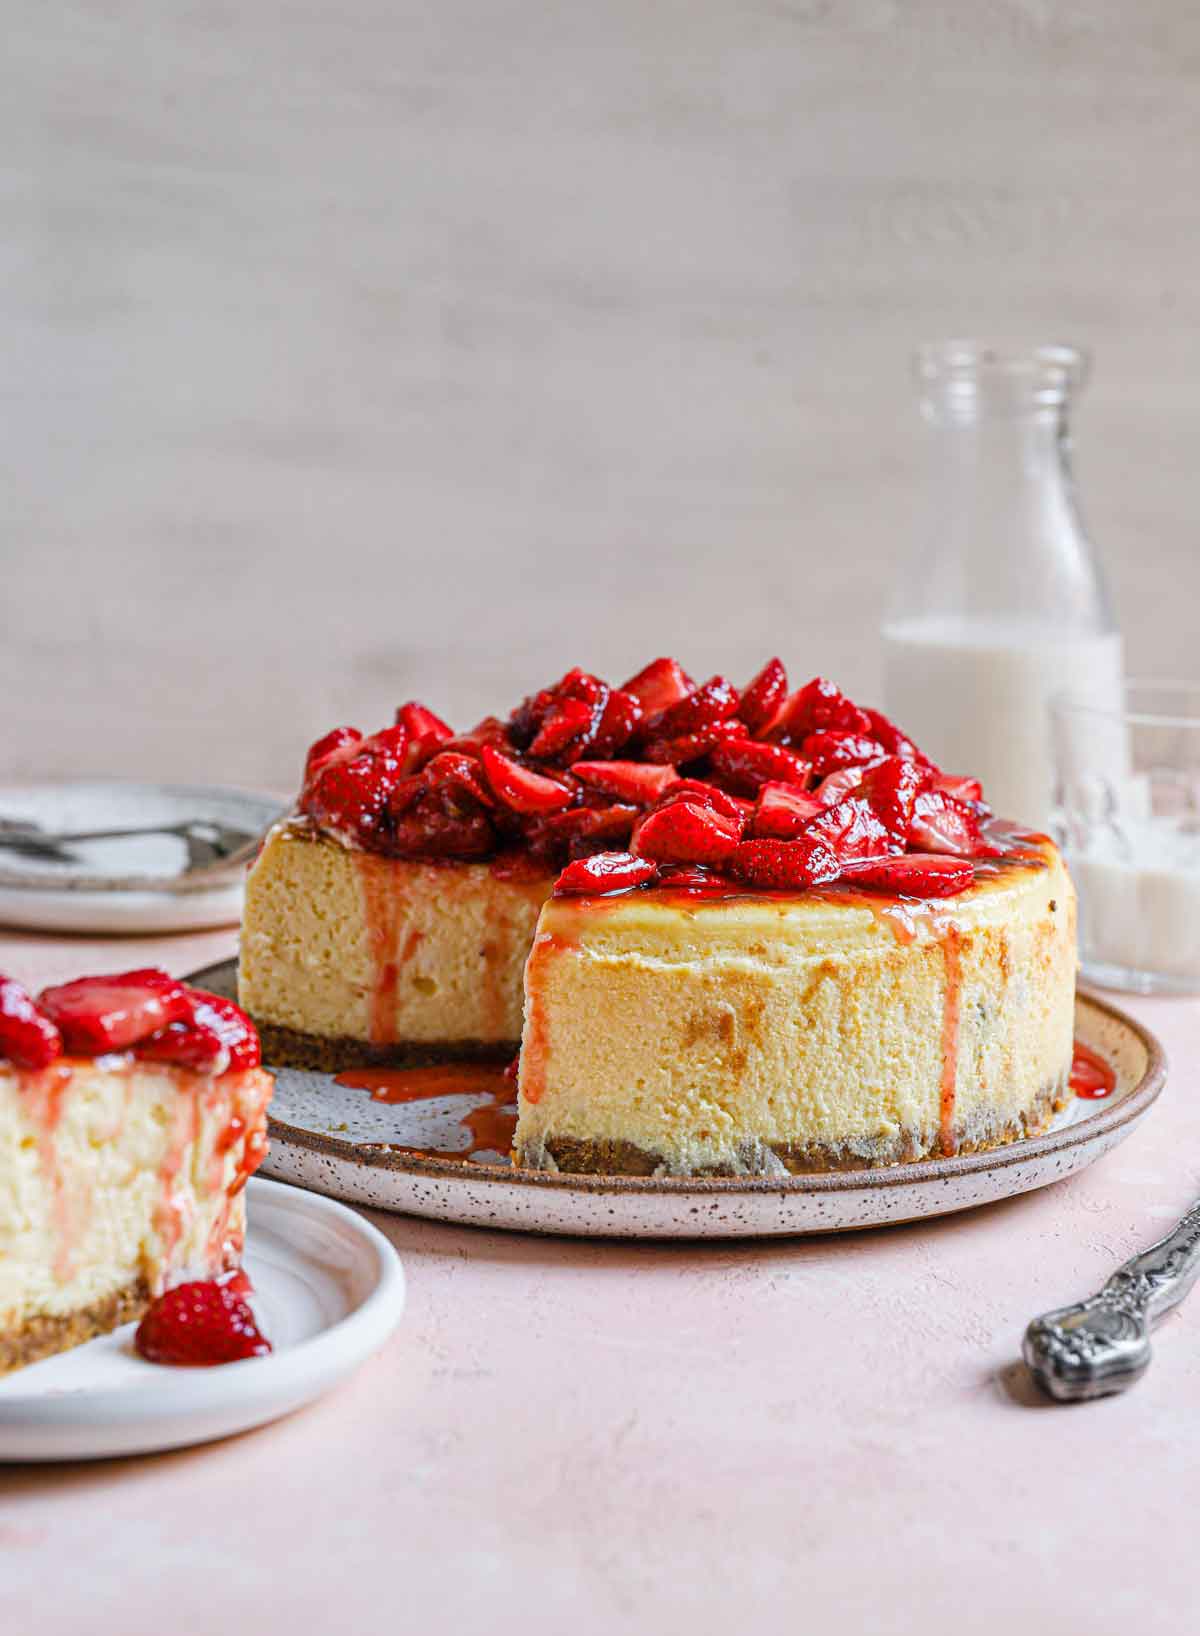 Side view of New York cheesecake with strawberries on top and one slice removed.